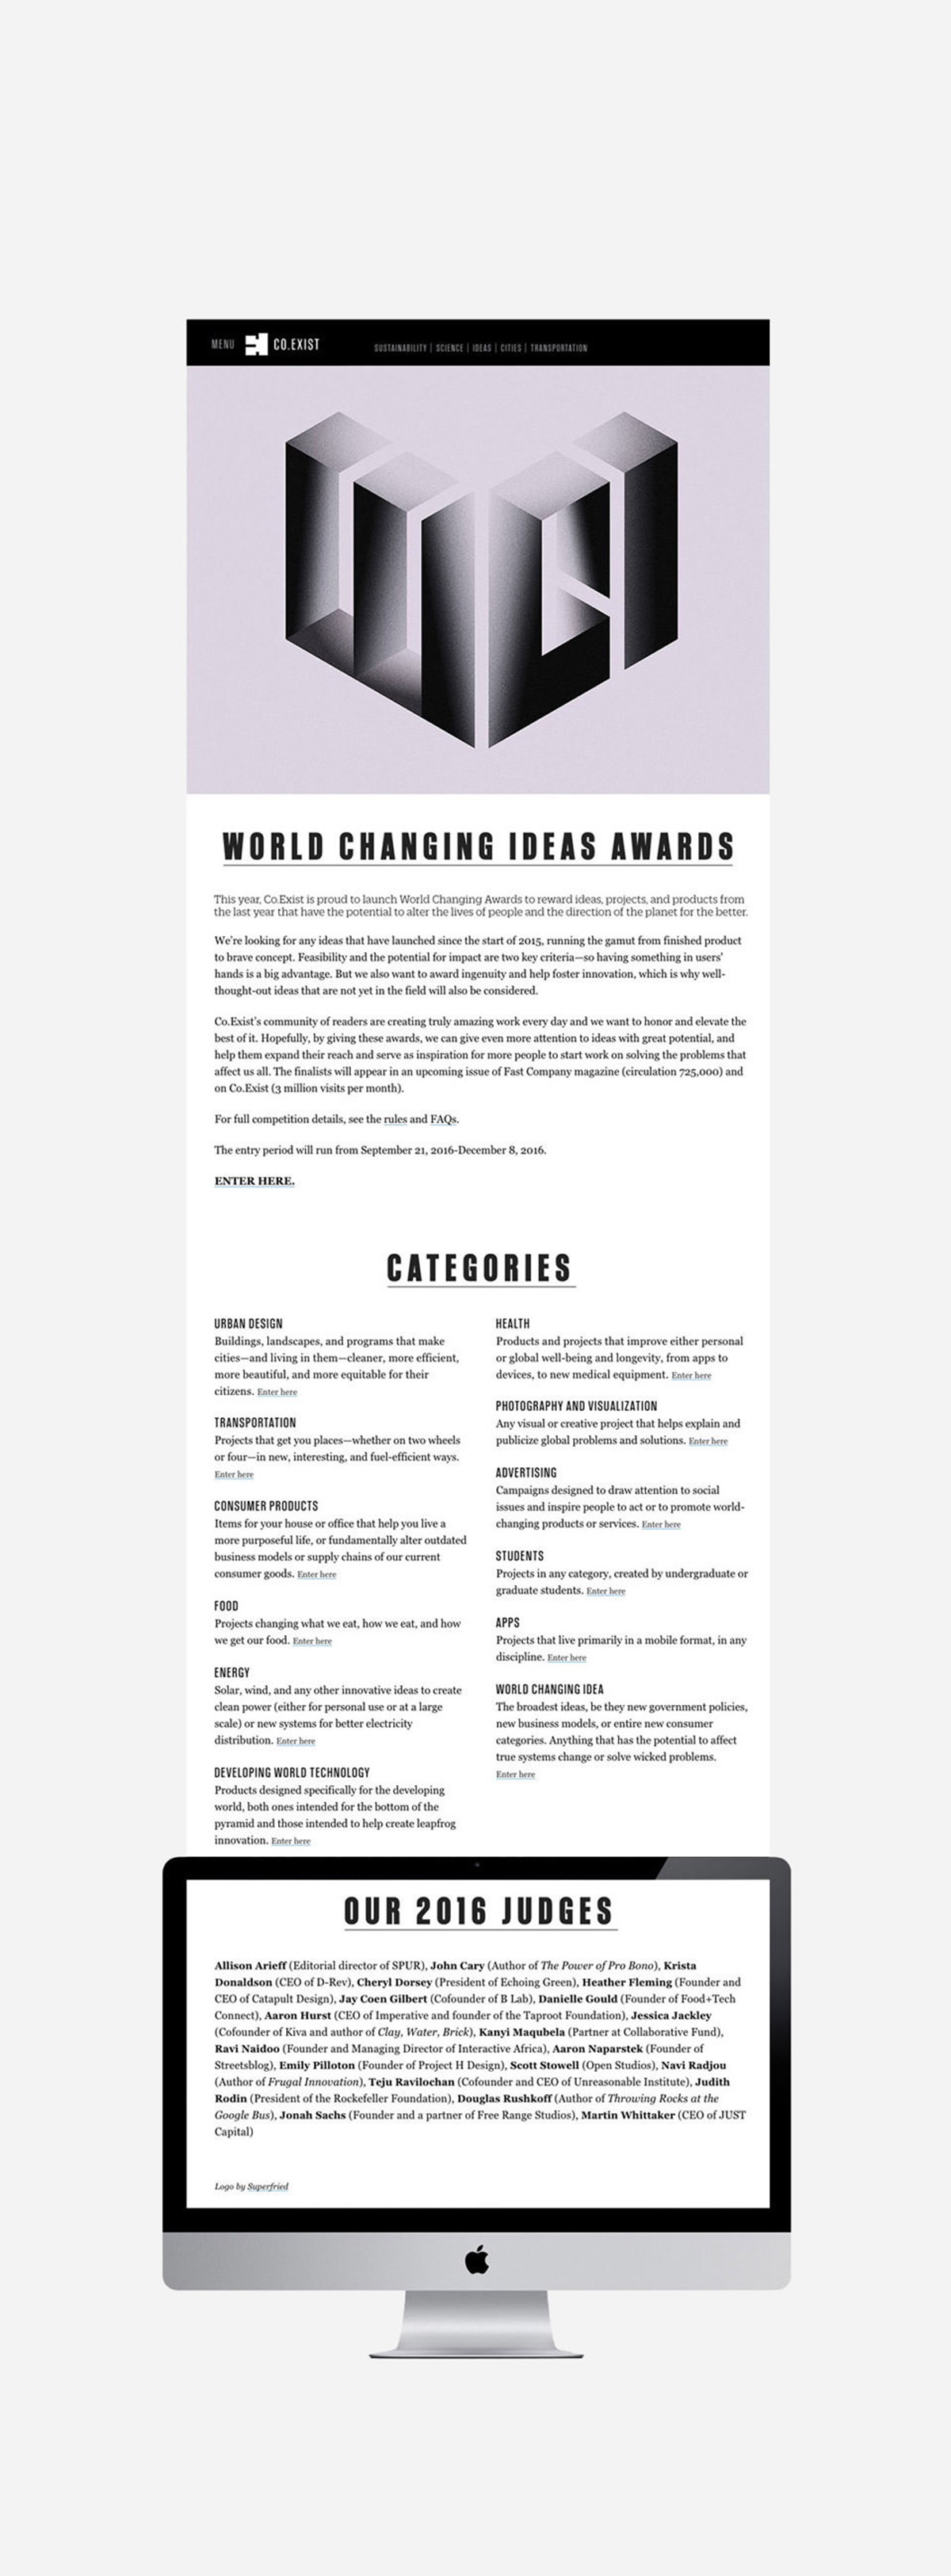 Fast Company. World Changing Ideas Awards webpage. Brand identity by Superfried.